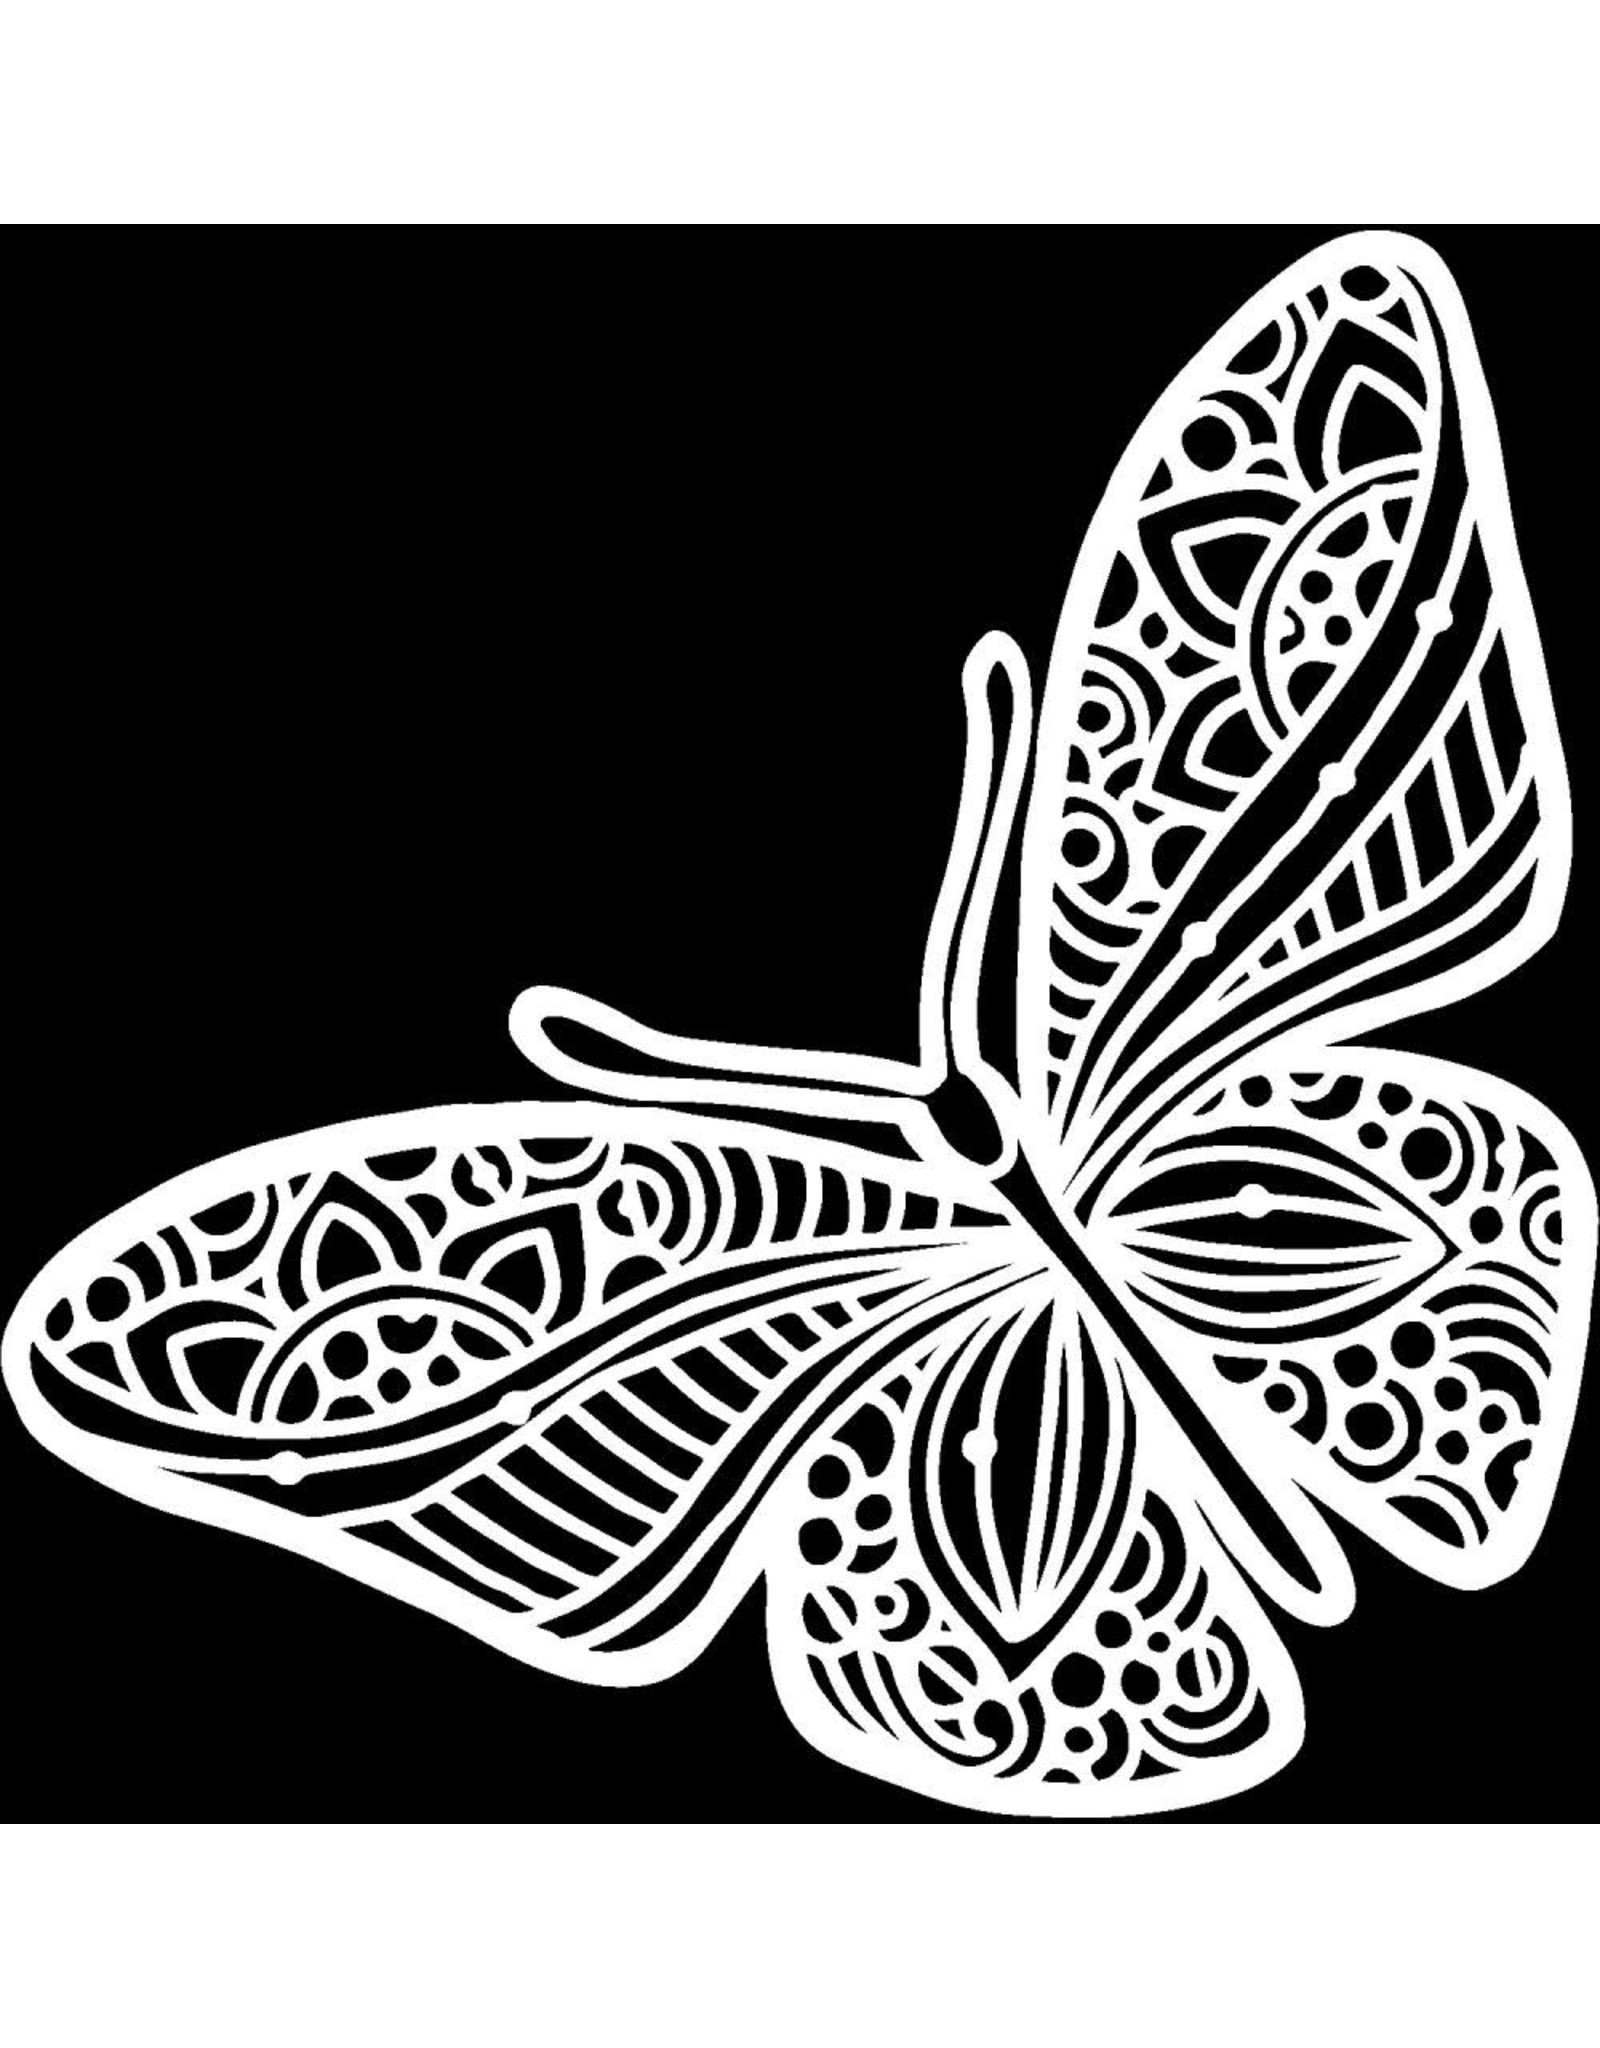 CRAFTERS WORKSHOP THE CRAFTERS WORKSHOP VALENTINA JOYOUS BUTTERFLY 12x12 STENCIL